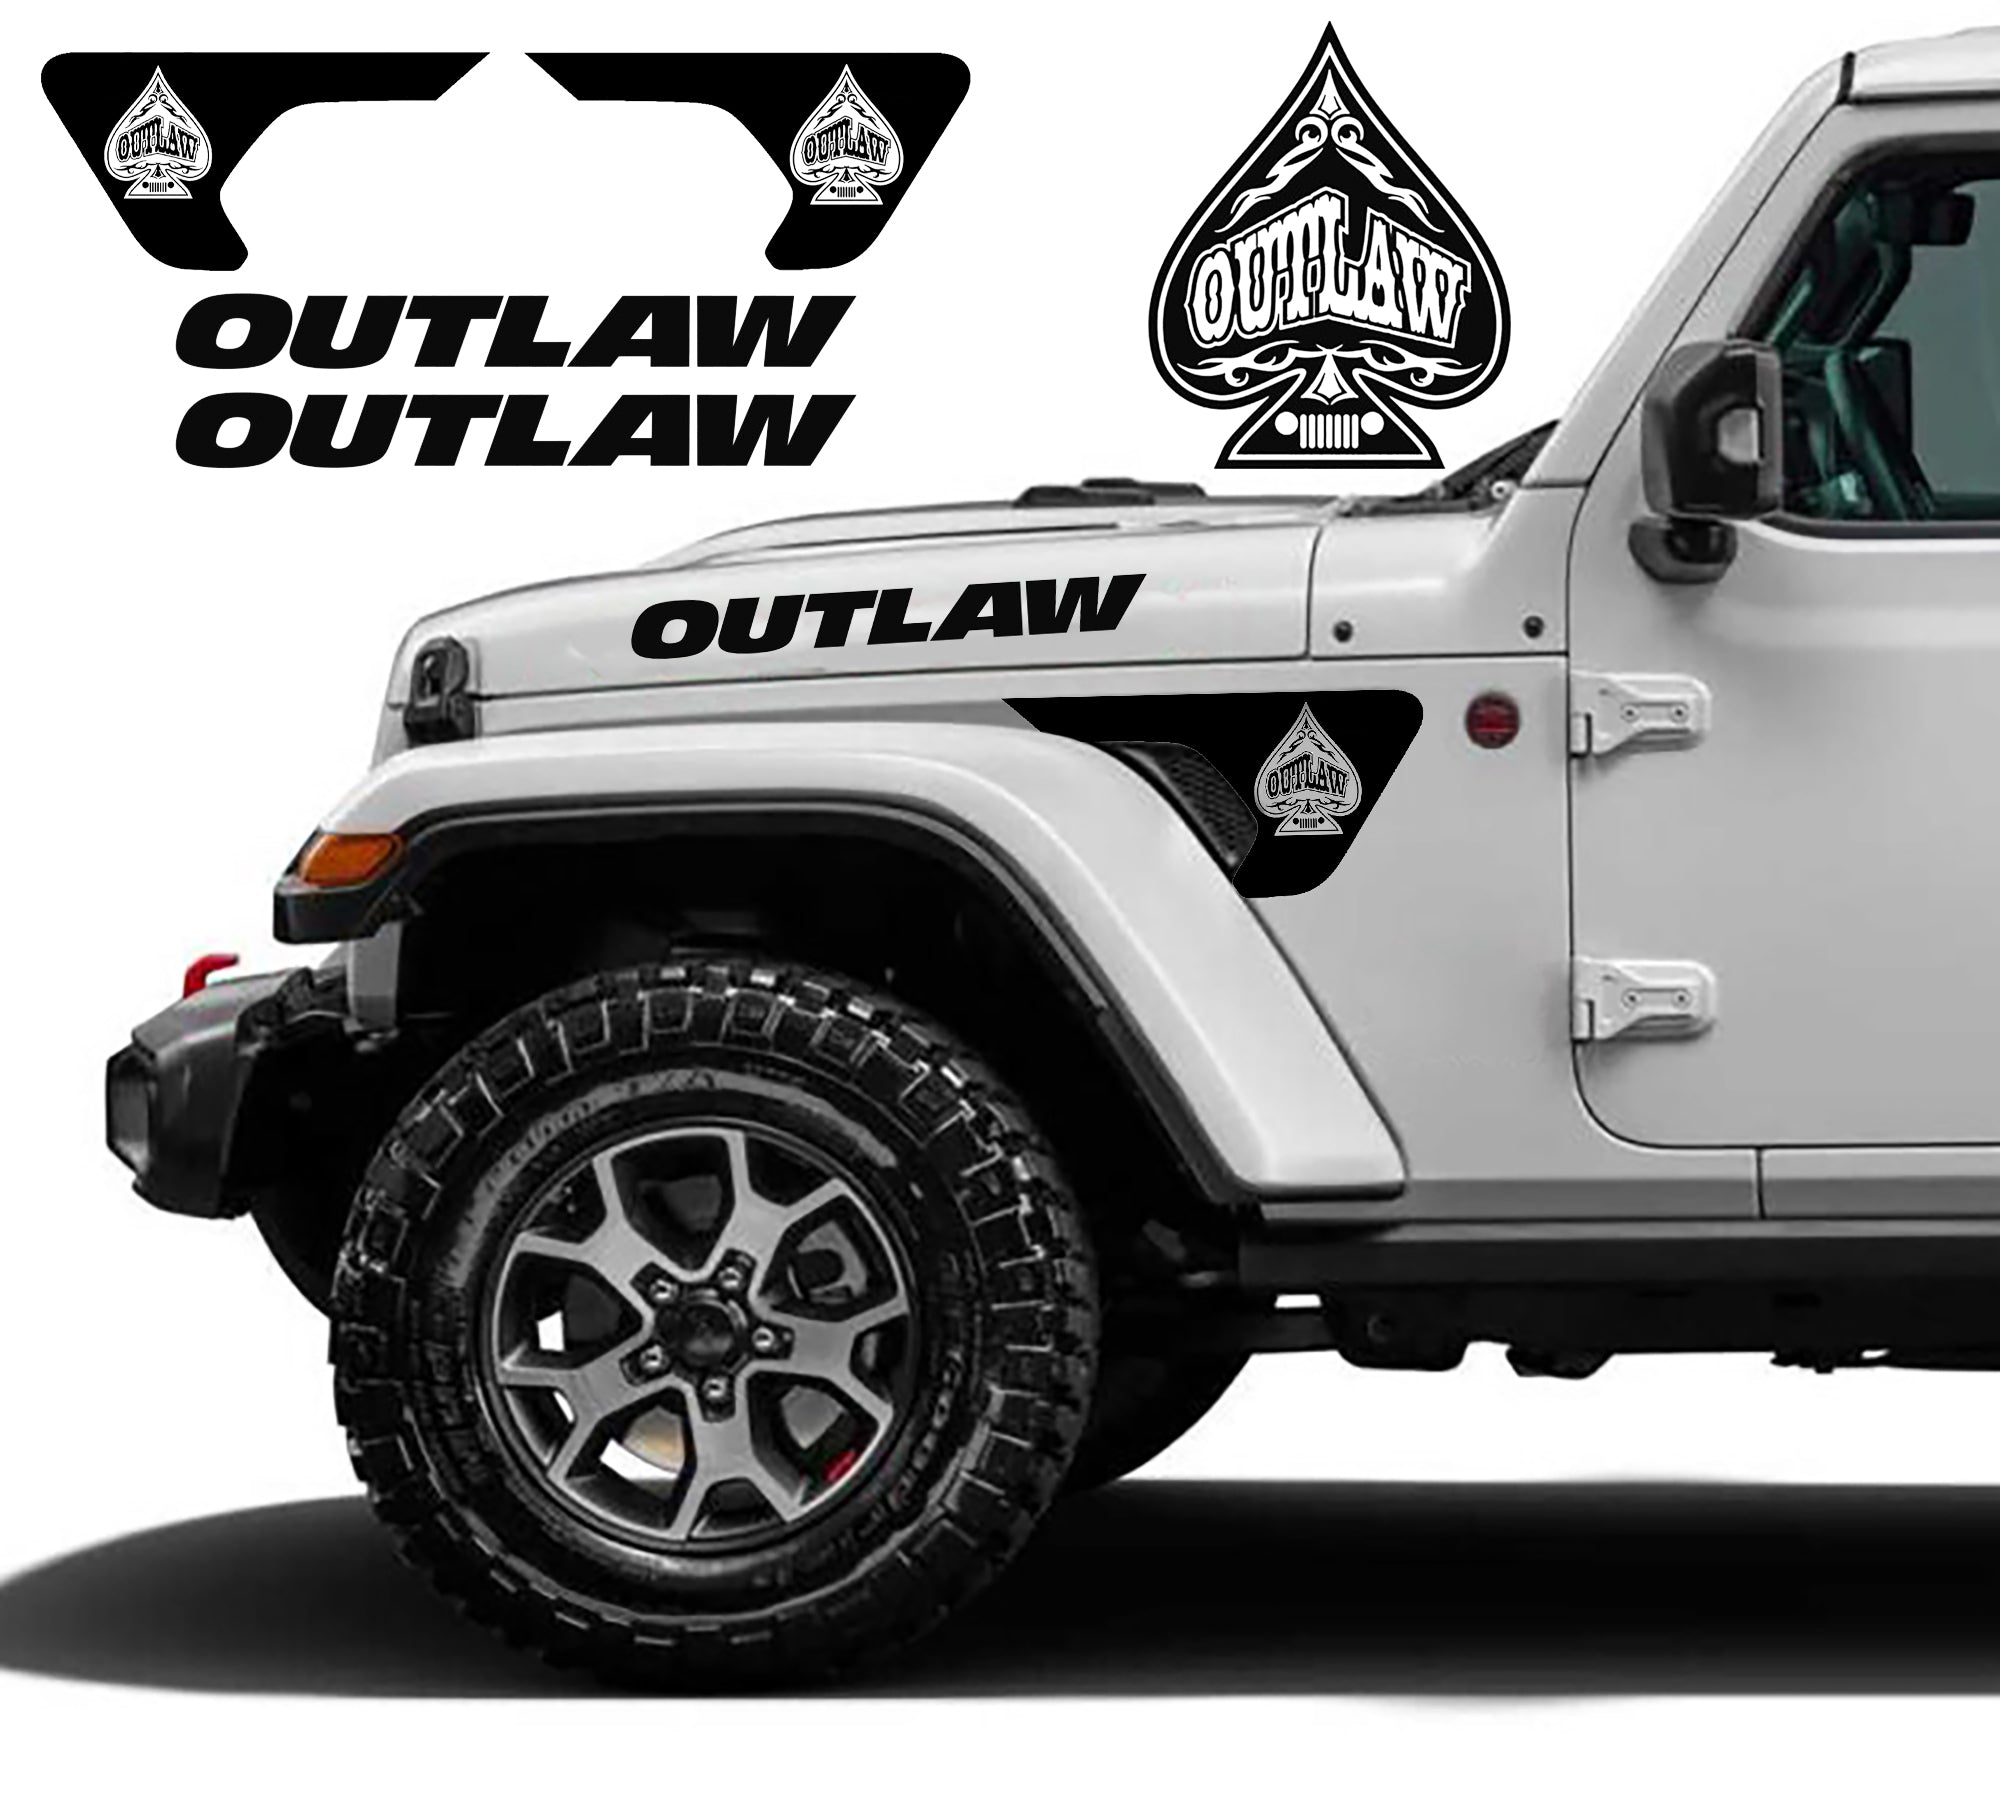 Outlaw fender and hood decal for jeep wrangler jl 2018 to 2023 models.